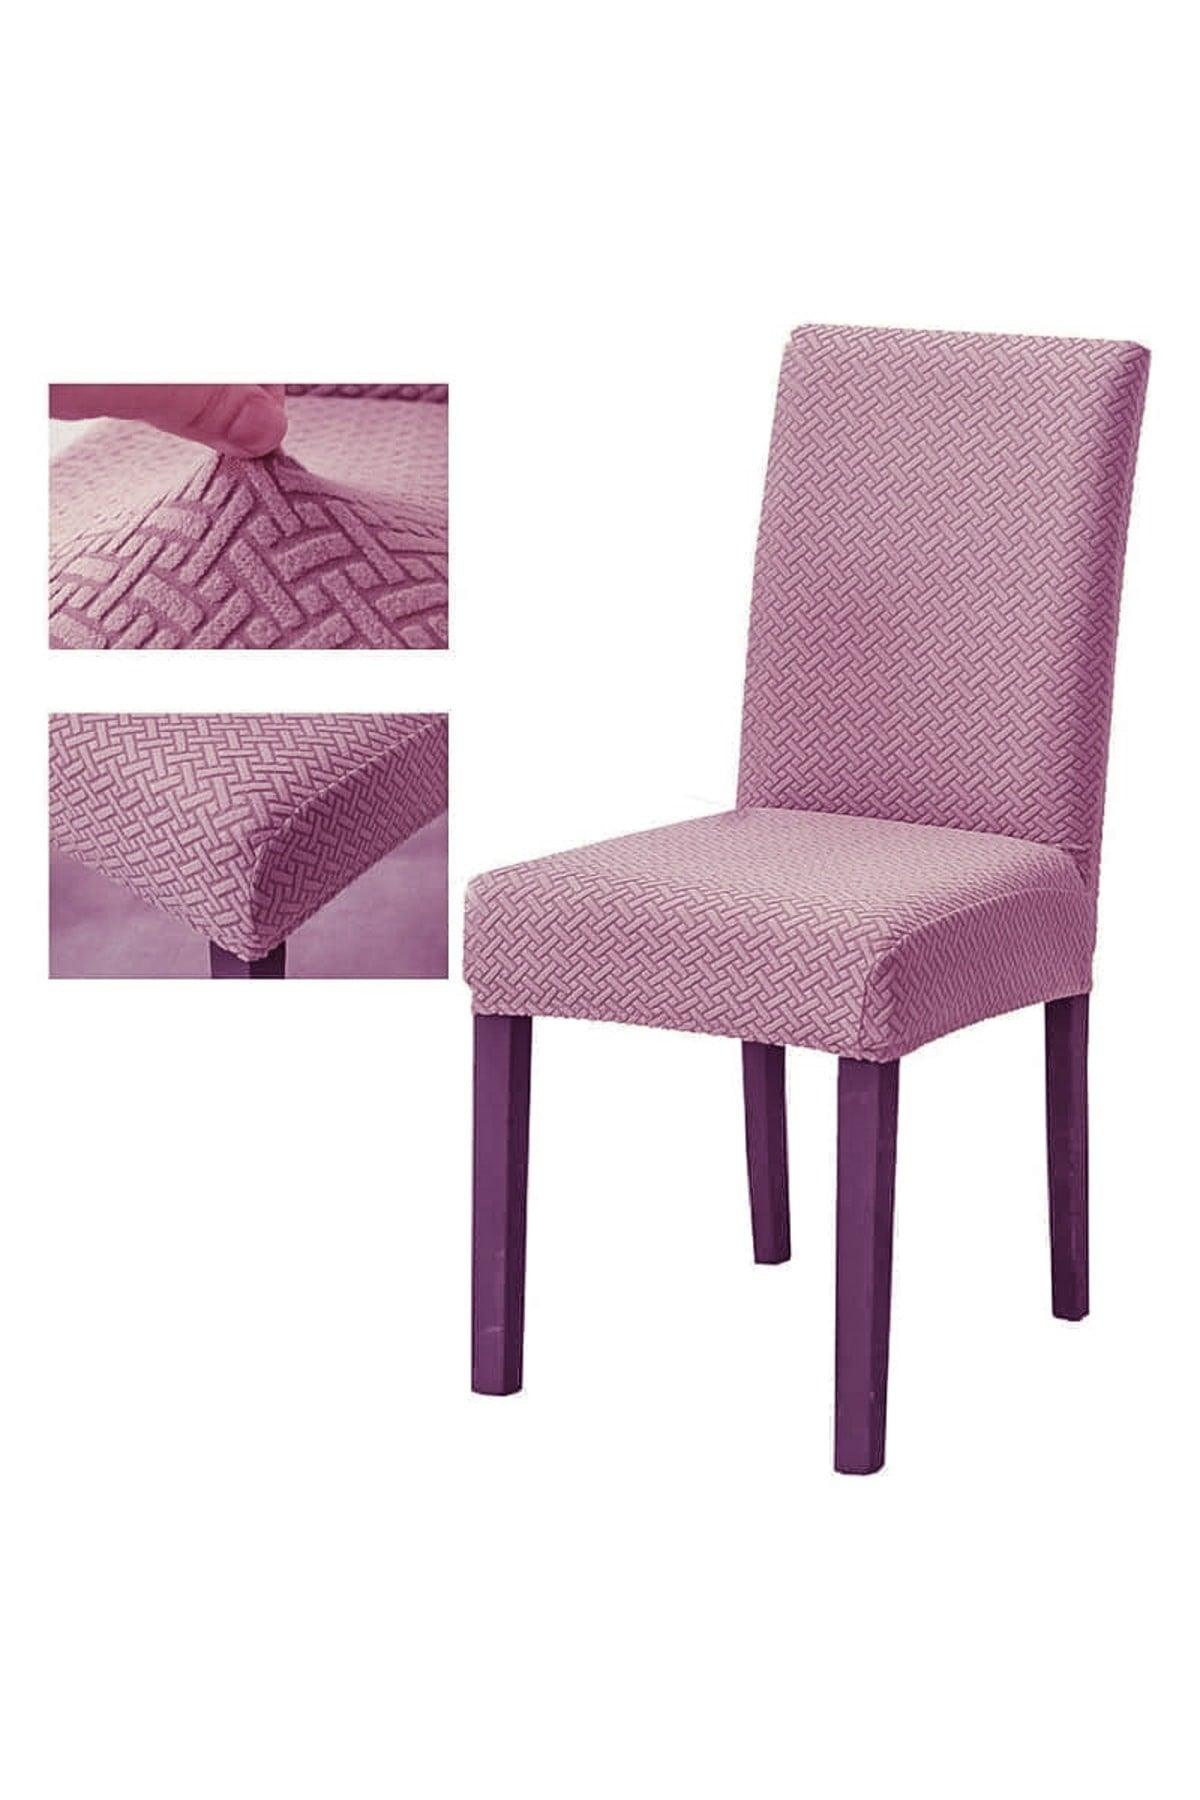 High Quality Chair Cover, Lycra, Washable 1 Piece Powder Color - Swordslife